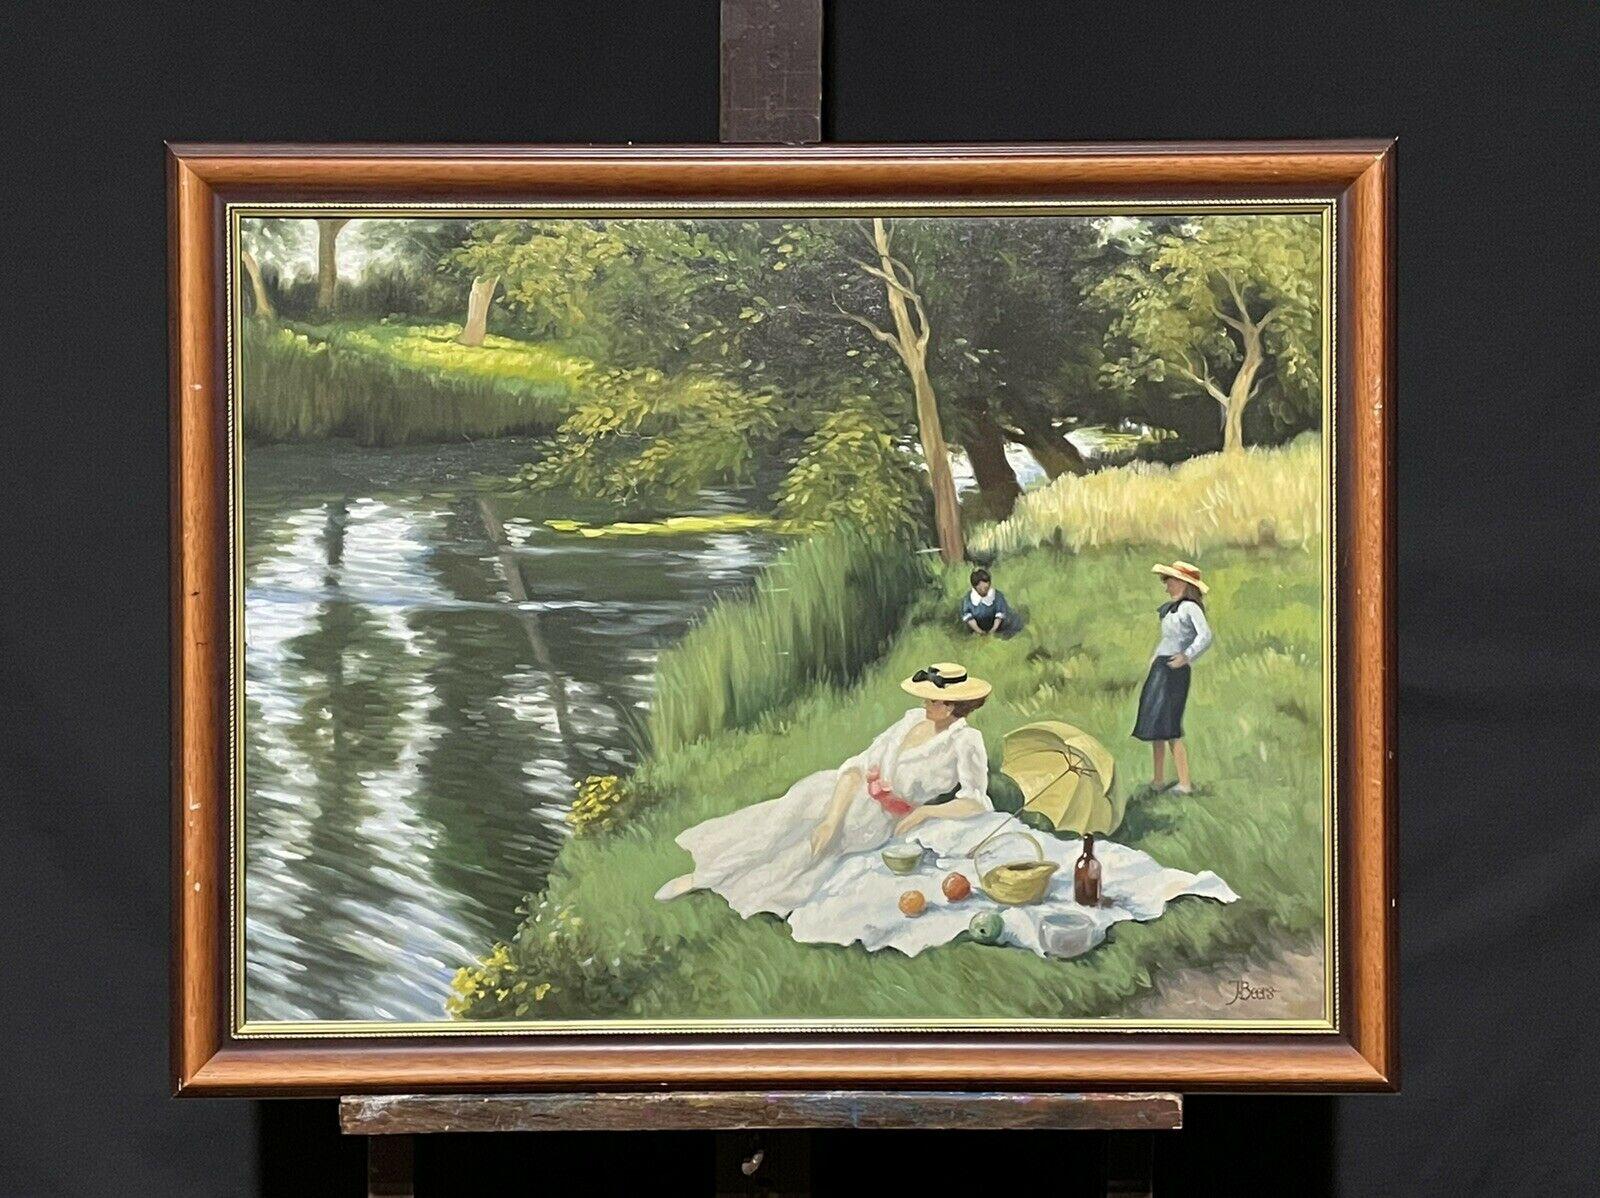 LARGE DUTCH 20TH CENTURY IMPRESSIONIST SIGNED OIL - FAMILY PICNIC BY THE RIVER - Painting by J. Beers